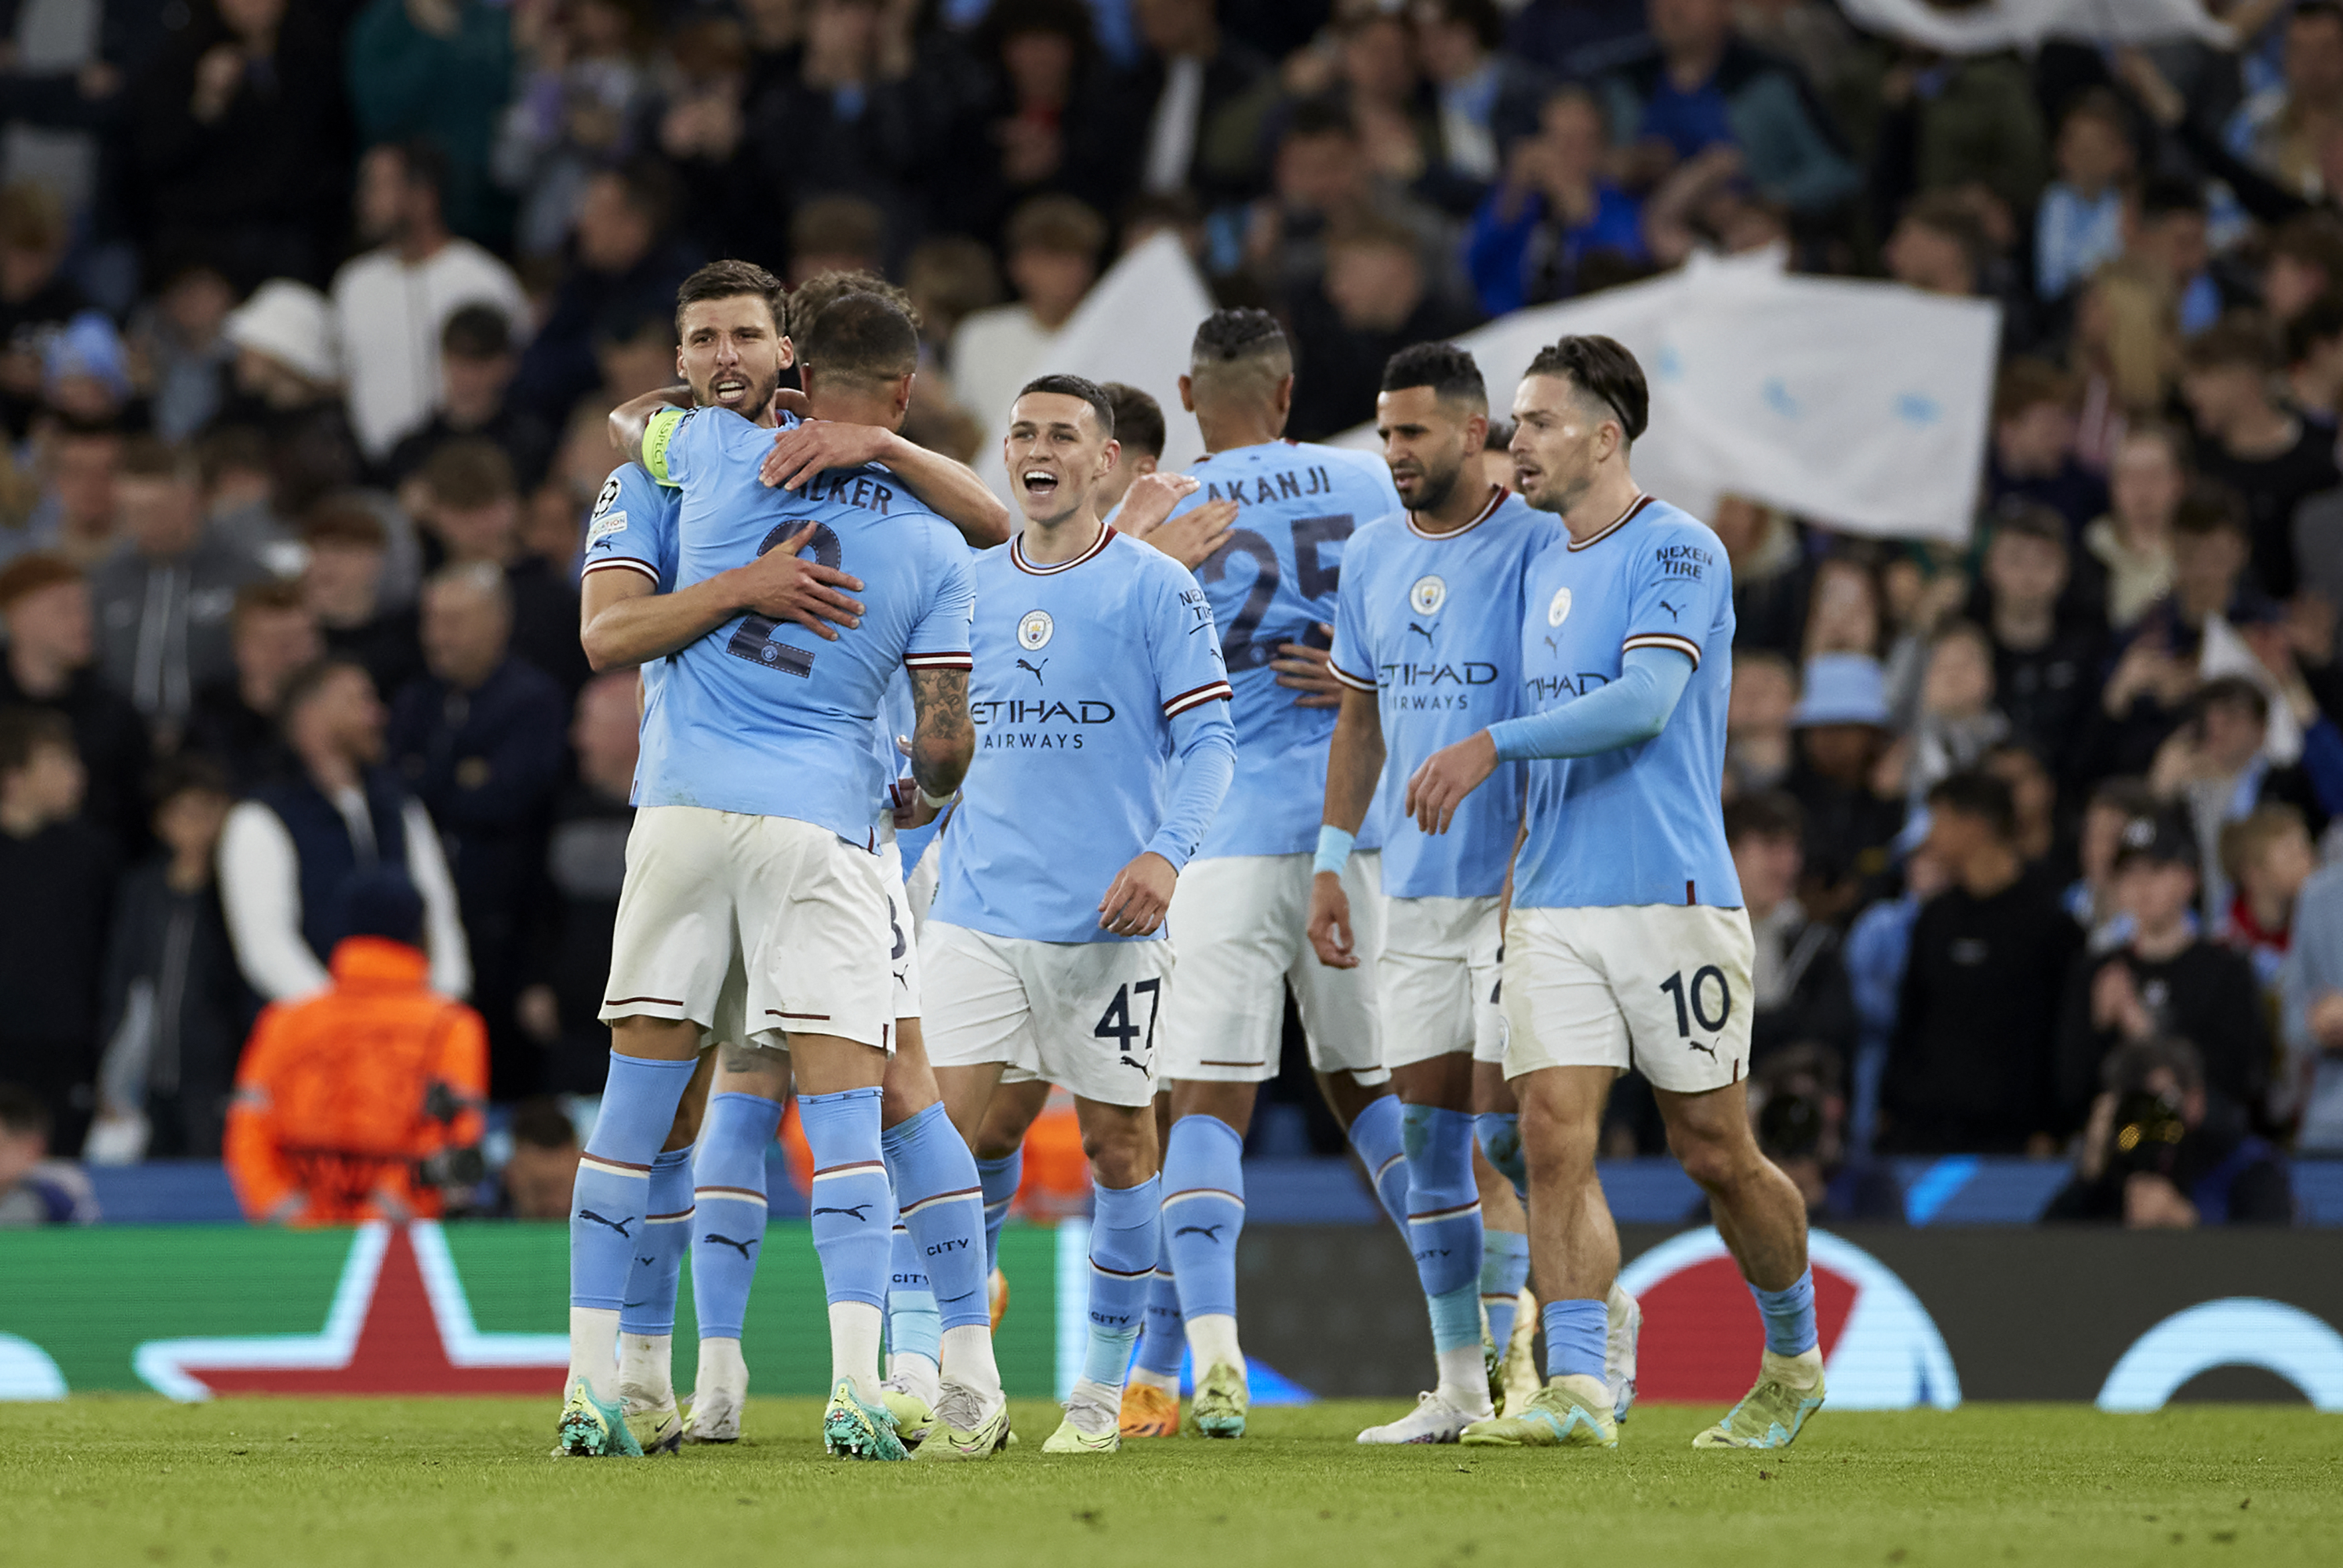 Players of Manchester City celebrate after winning the UEFA Champions League semi-final second leg match against Real Madrid at Etihad Stadium on May 17, 2023 in Manchester, United Kingdom.